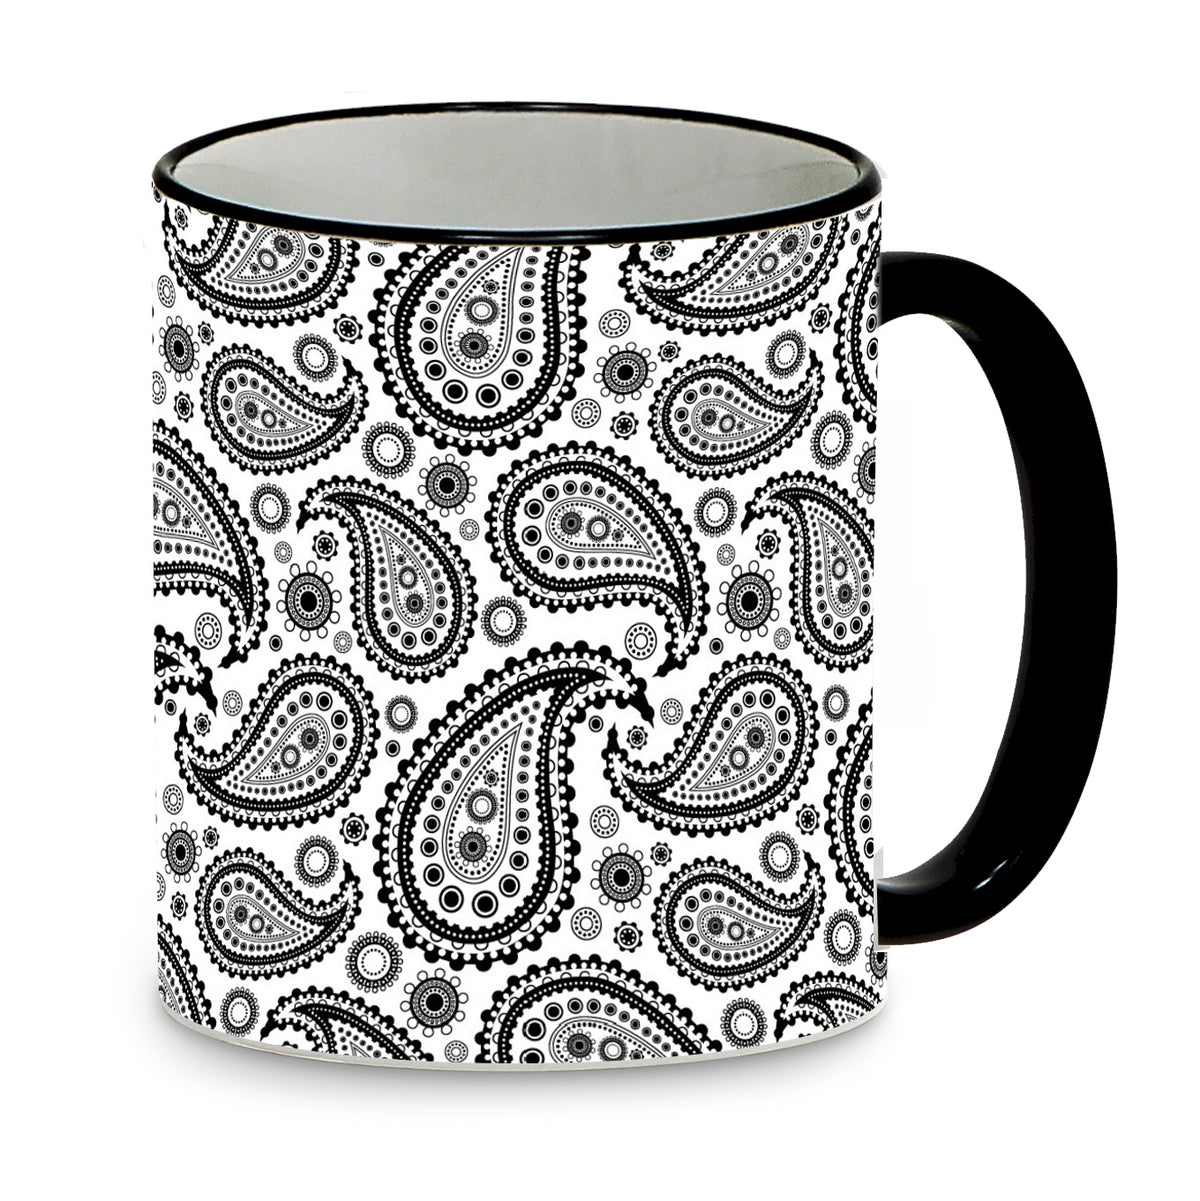 SUBLIMART: B&amp;W Beauty  - Mug featuring a paisley design in black and white - Artistica.com